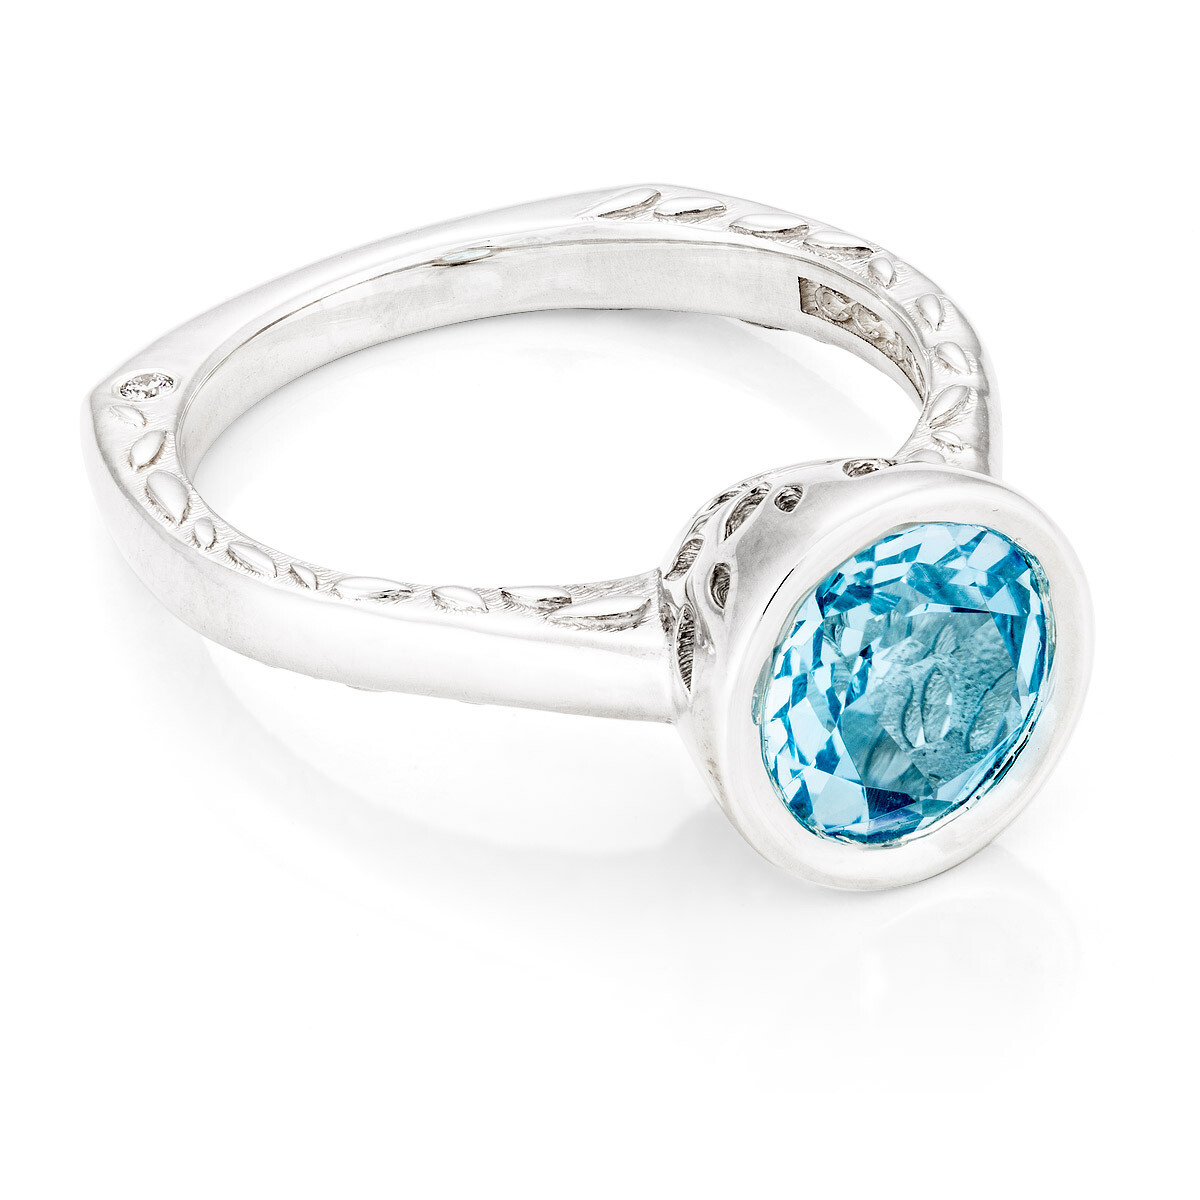 CC Tuileries©—Silver with Blue Topaz